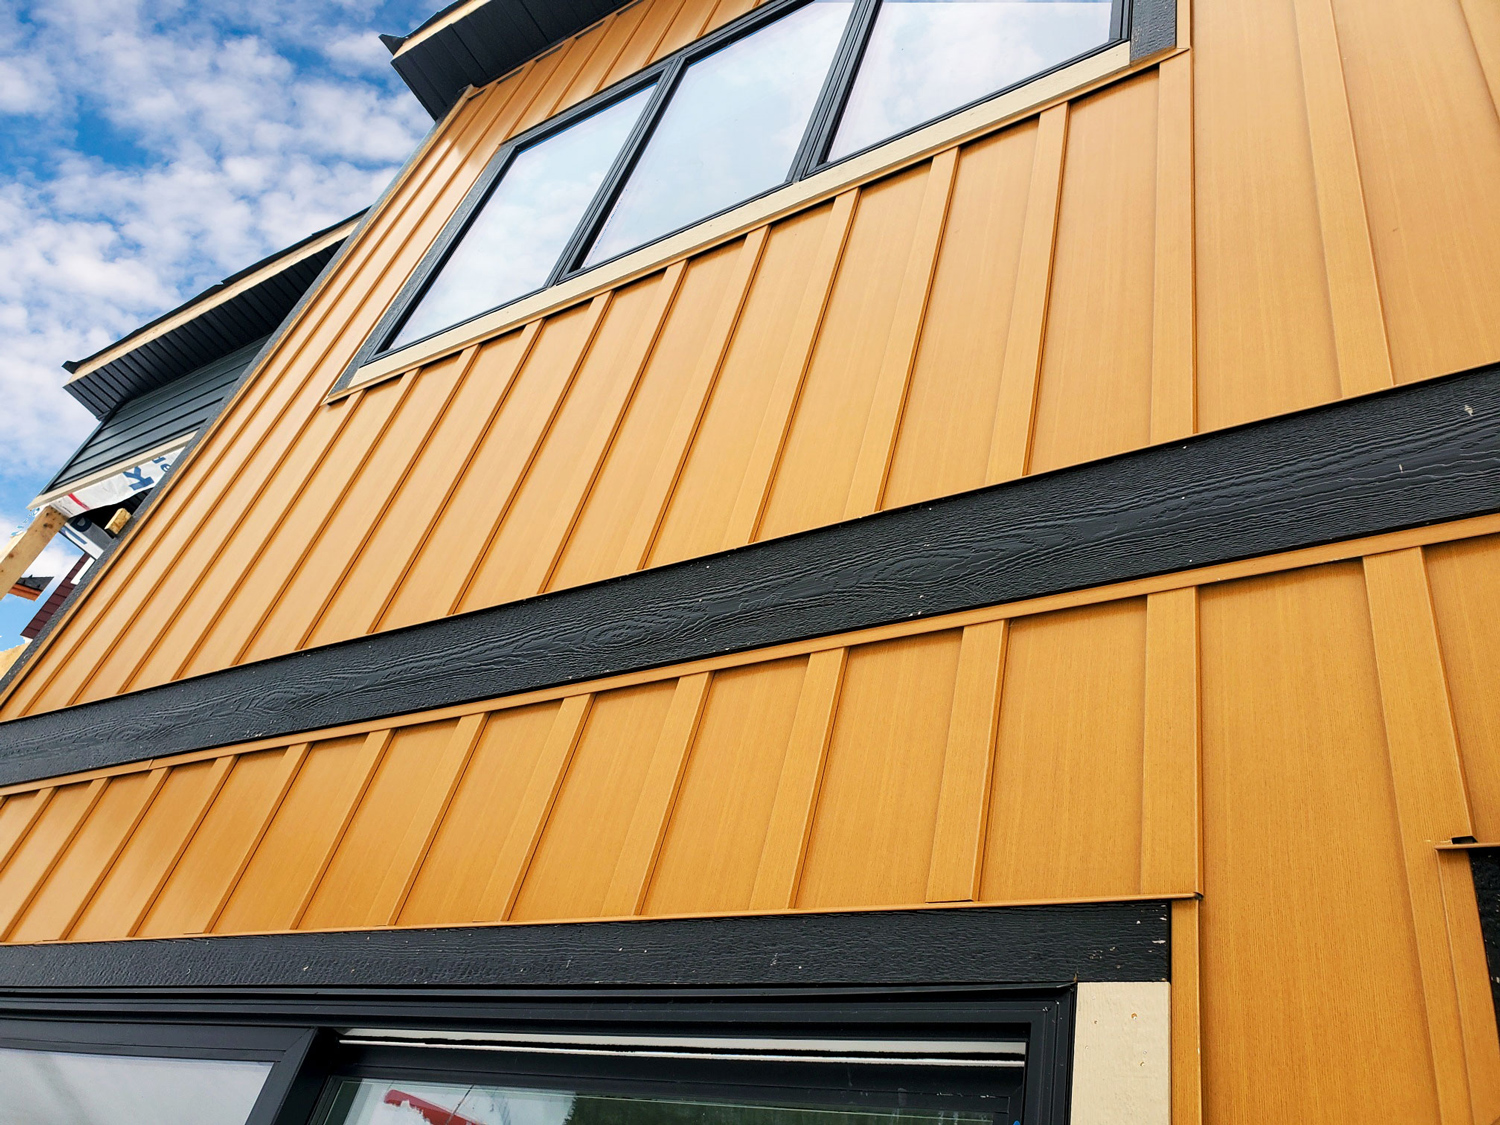 Residential Build with Board and Batten panel in Autumn Woodgrain